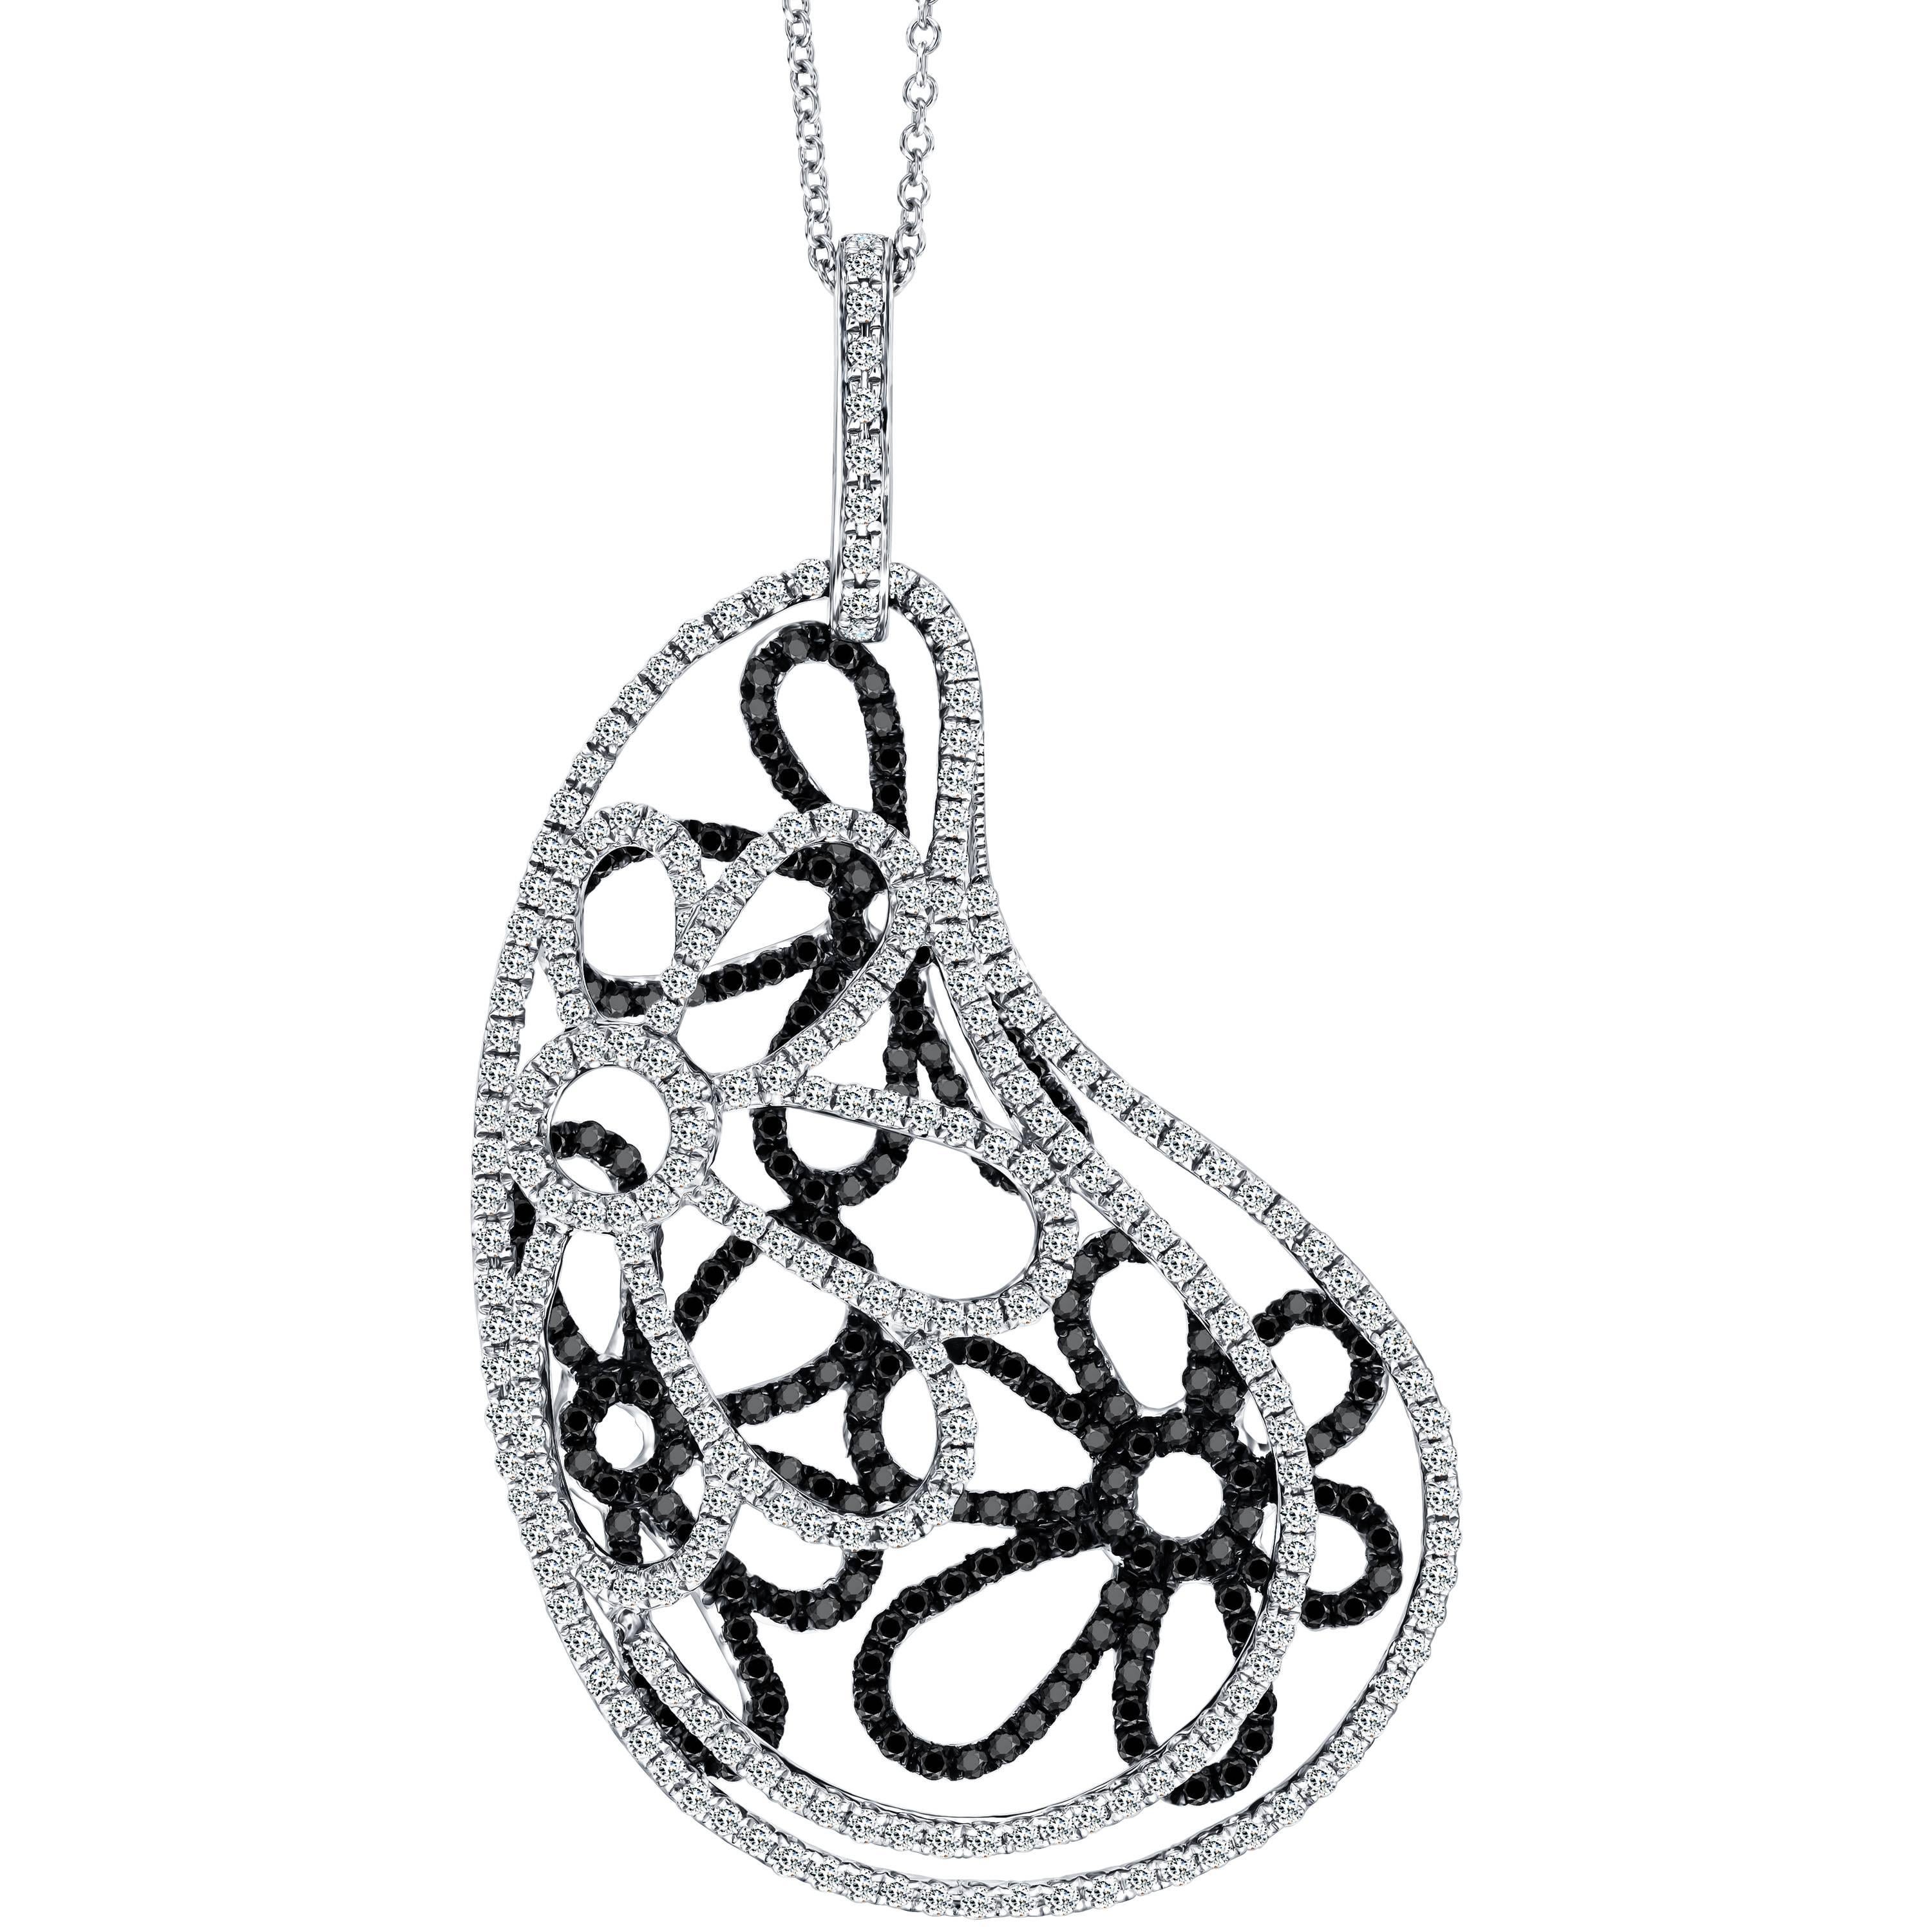 Fancy floral pendant in 18k white gold with 1.81 carat black and white diamonds